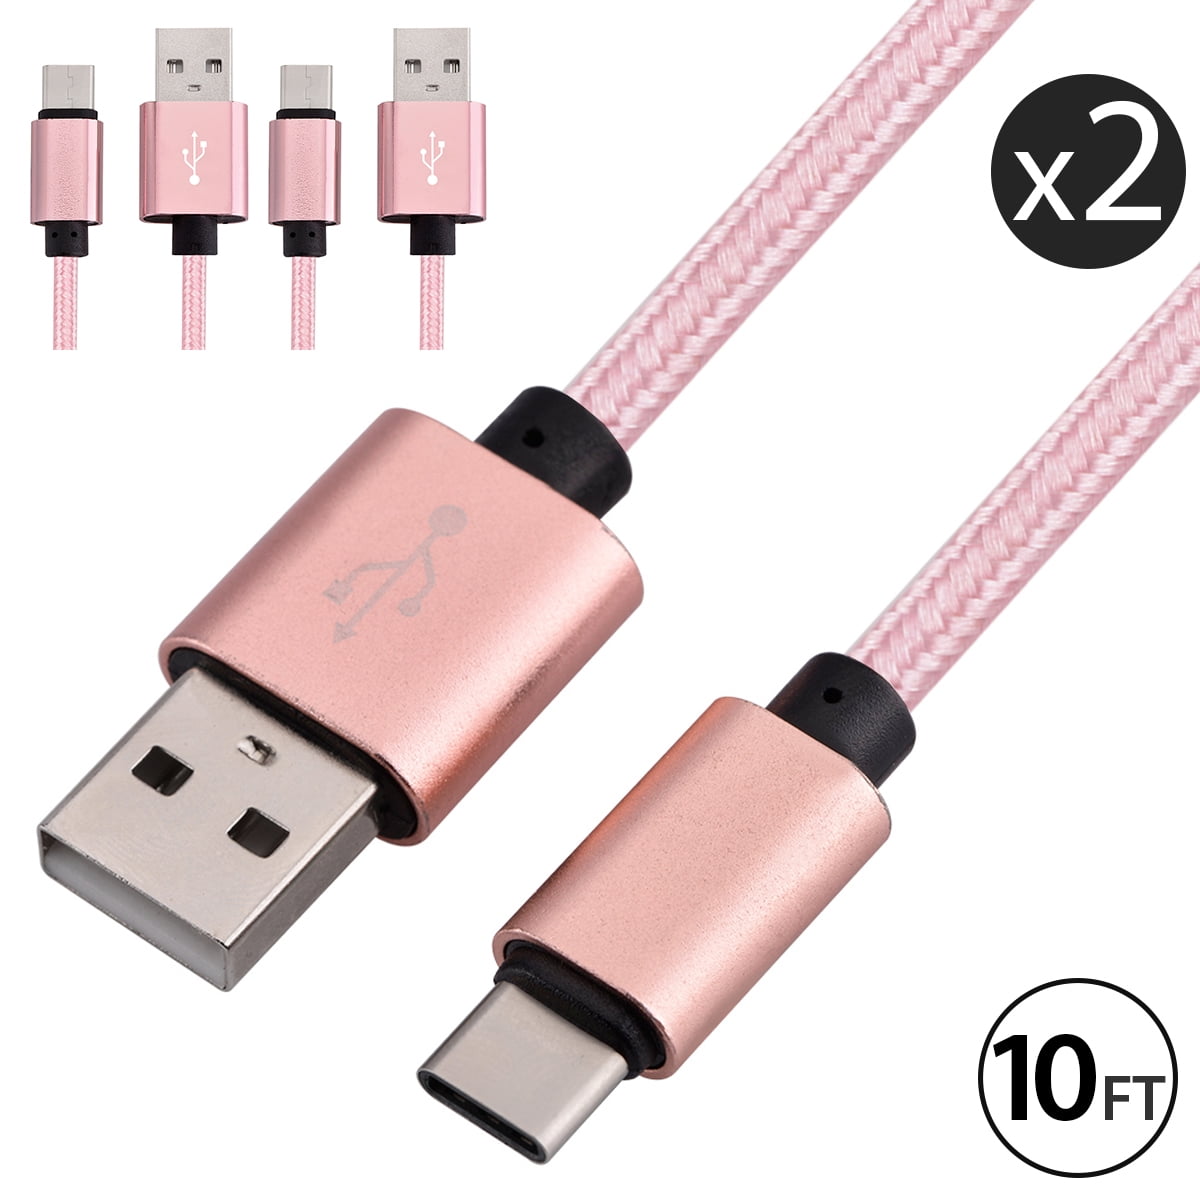 1M Great for USB-C Devices Galaxy S8 HP USB C to USB C v3.1 Cable S9 - Fast Charge at 480Mbps 3 Feet Google Pixel and Others S8+ 